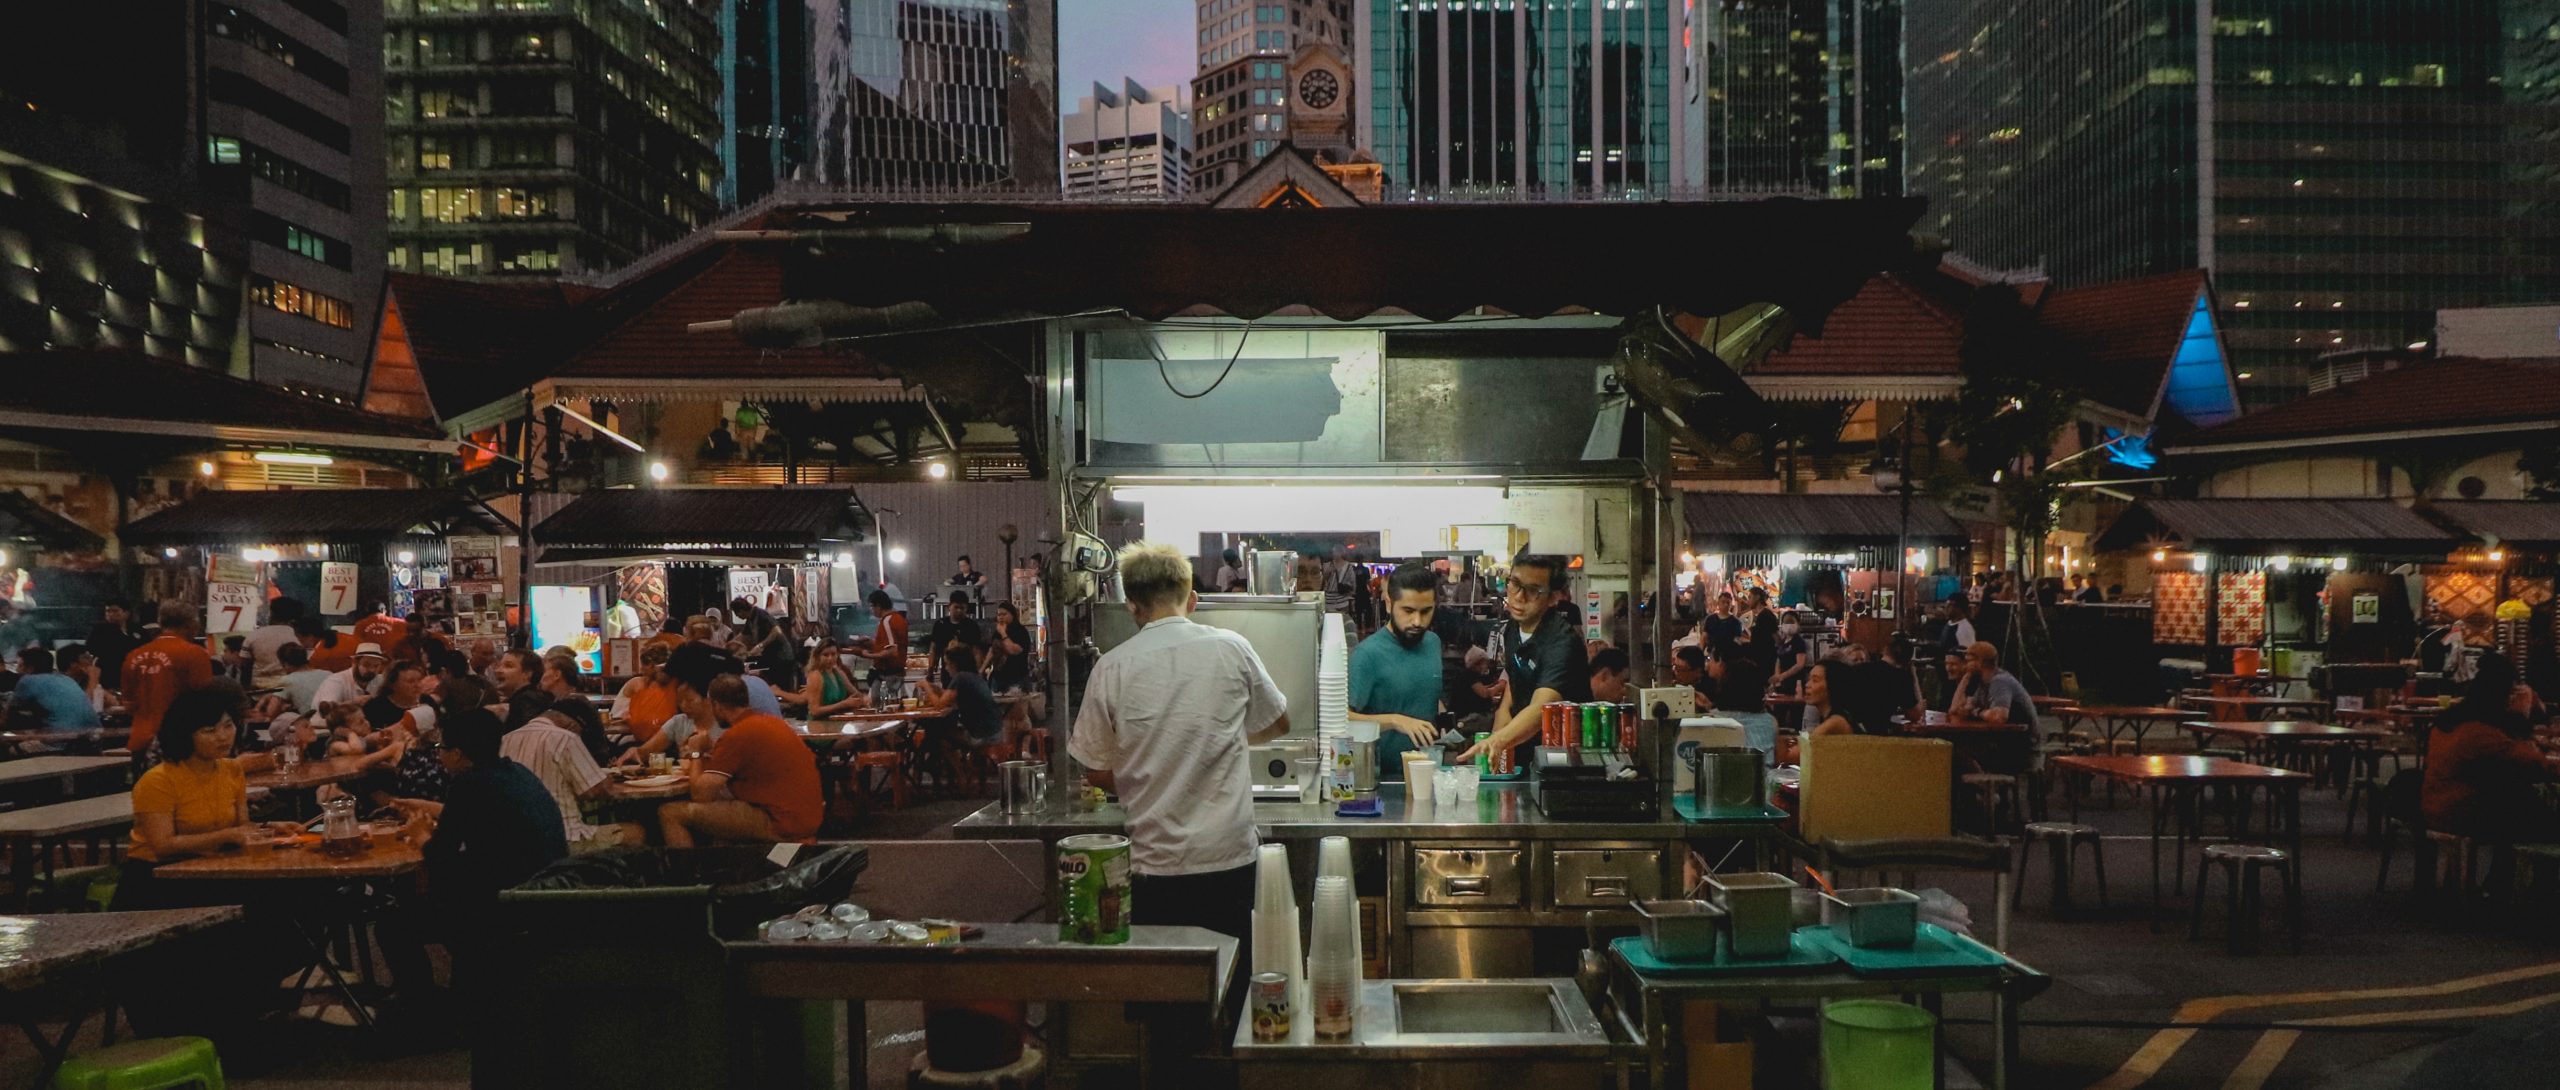 Cheap Culinary Places Less Than 10 SGD in Singapore - Lau Pa Sat